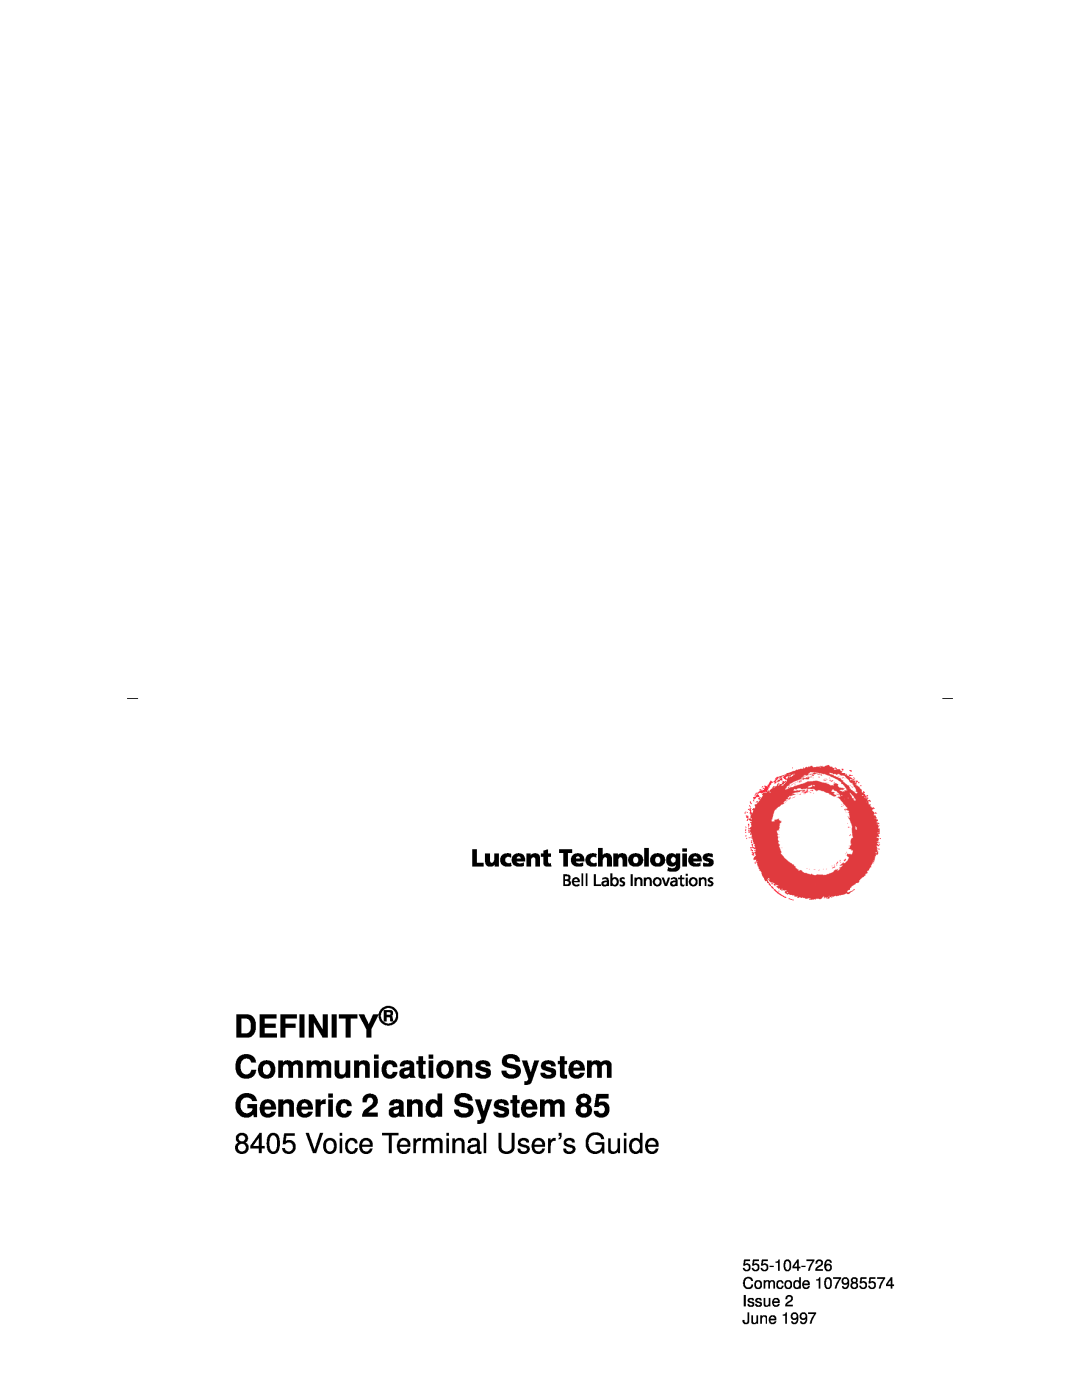 Lucent Technologies 8405 manual DEFINITY Communications System Generic 2 and System, Voice Terminal User’s Guide 